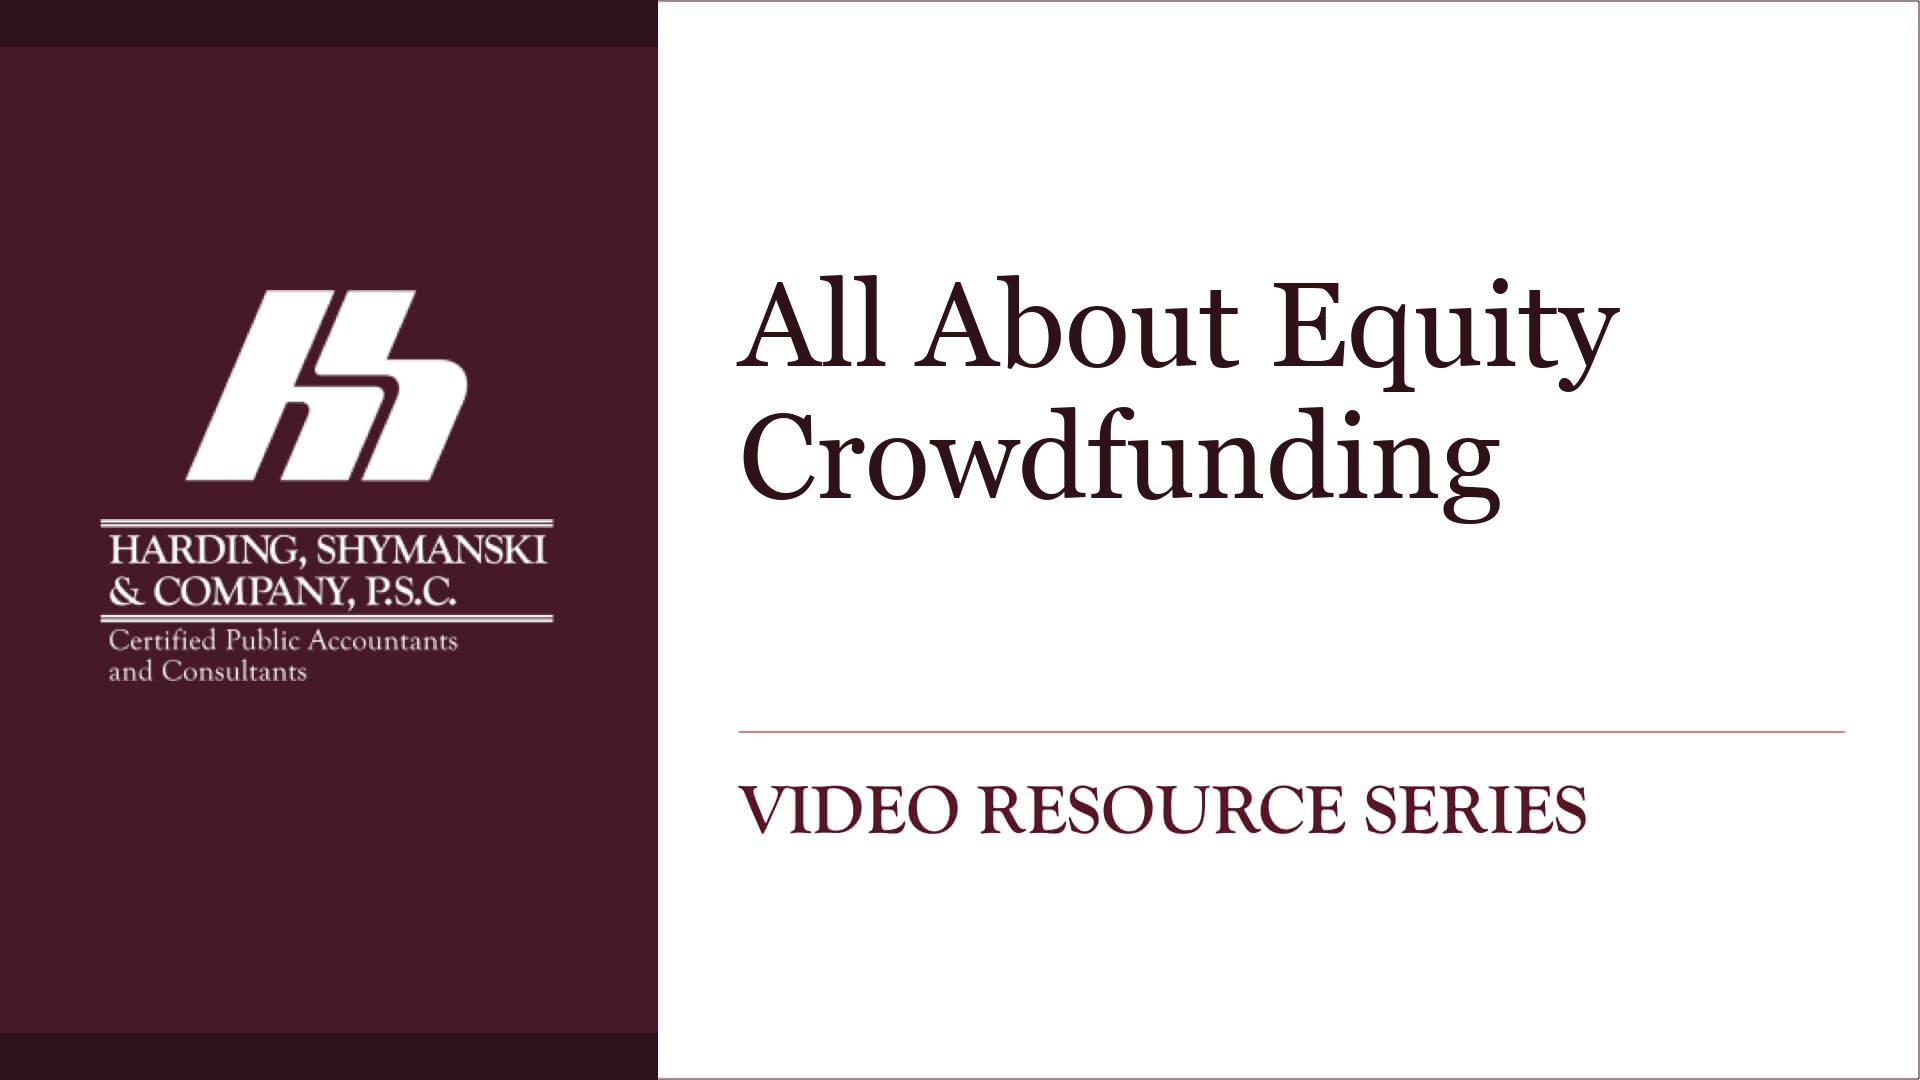 All About Equity Crowdfunding